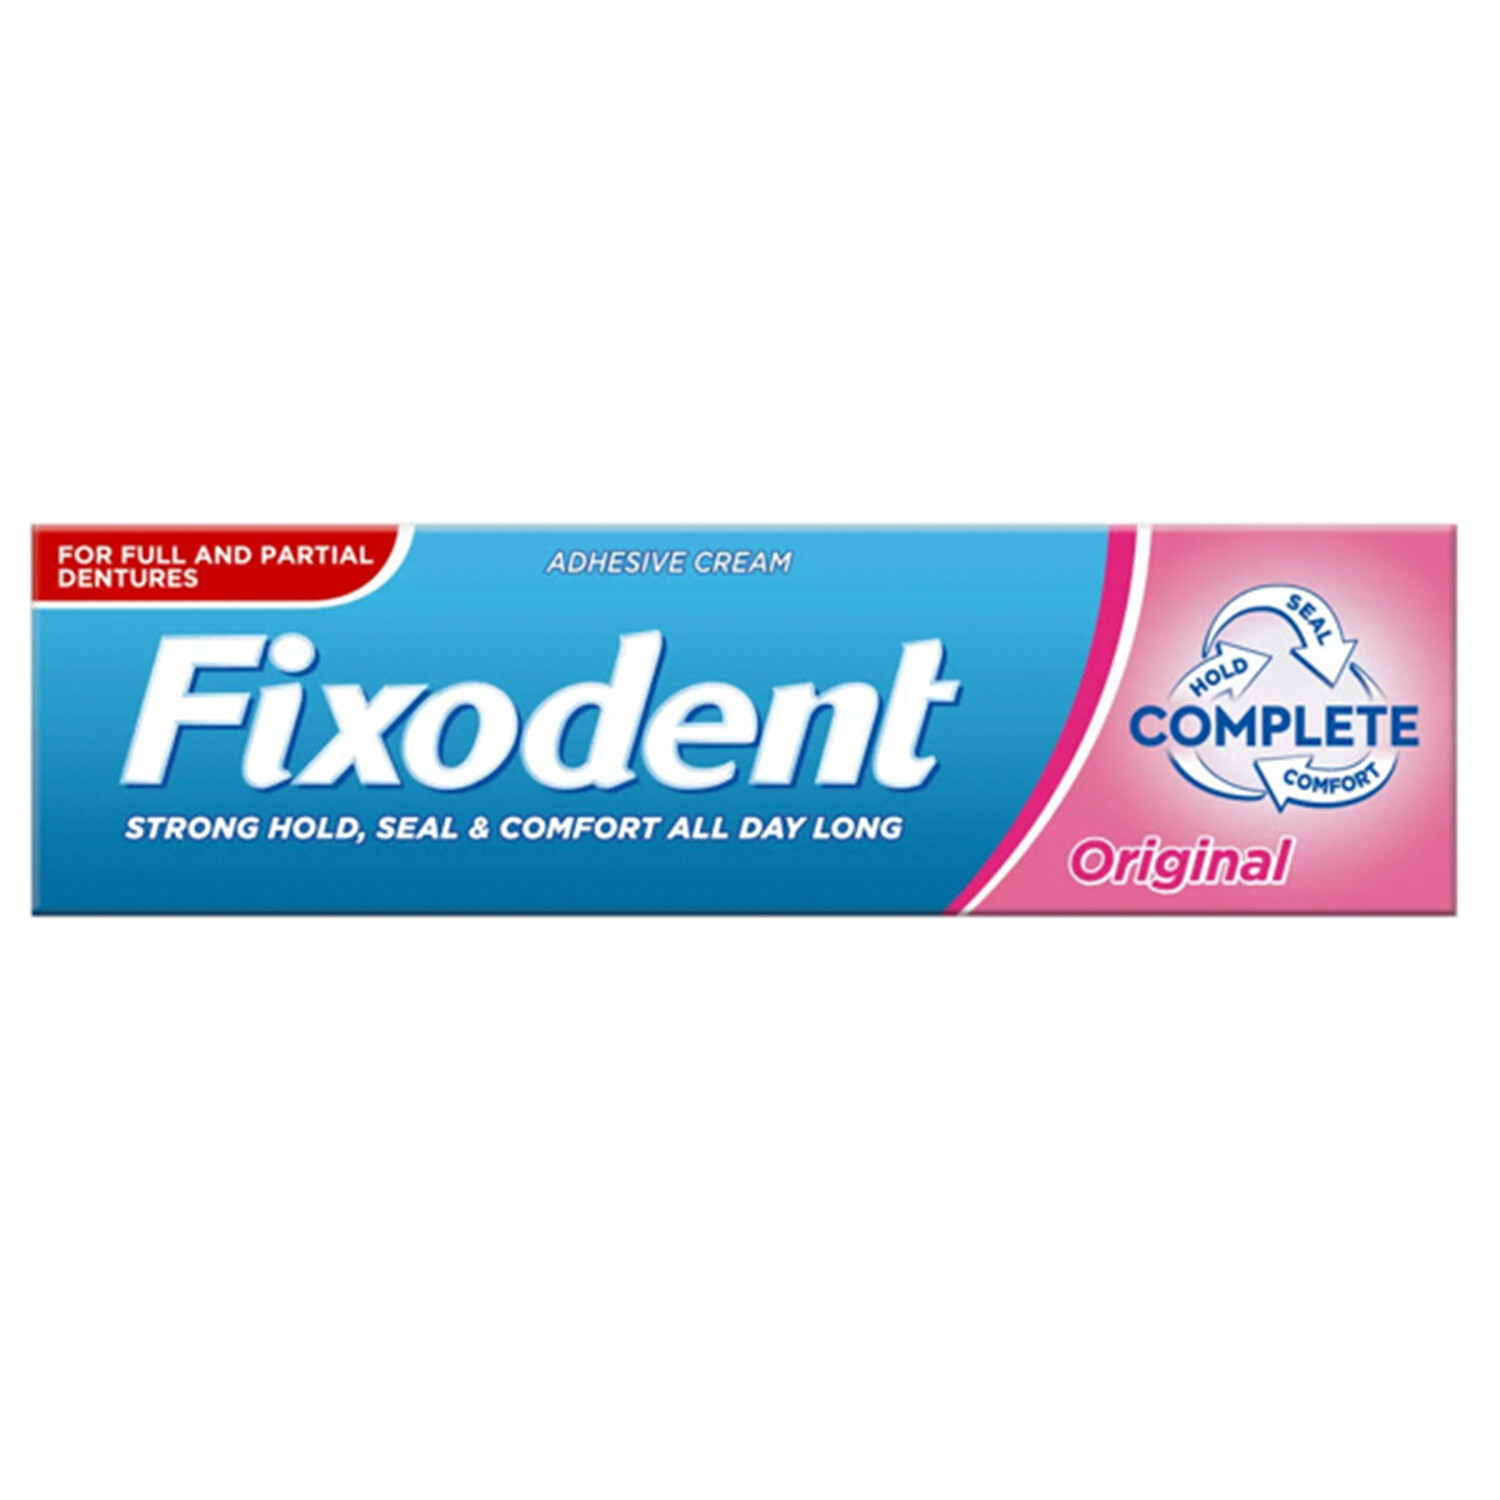 Fixodent Complete Denture Adhesive Image